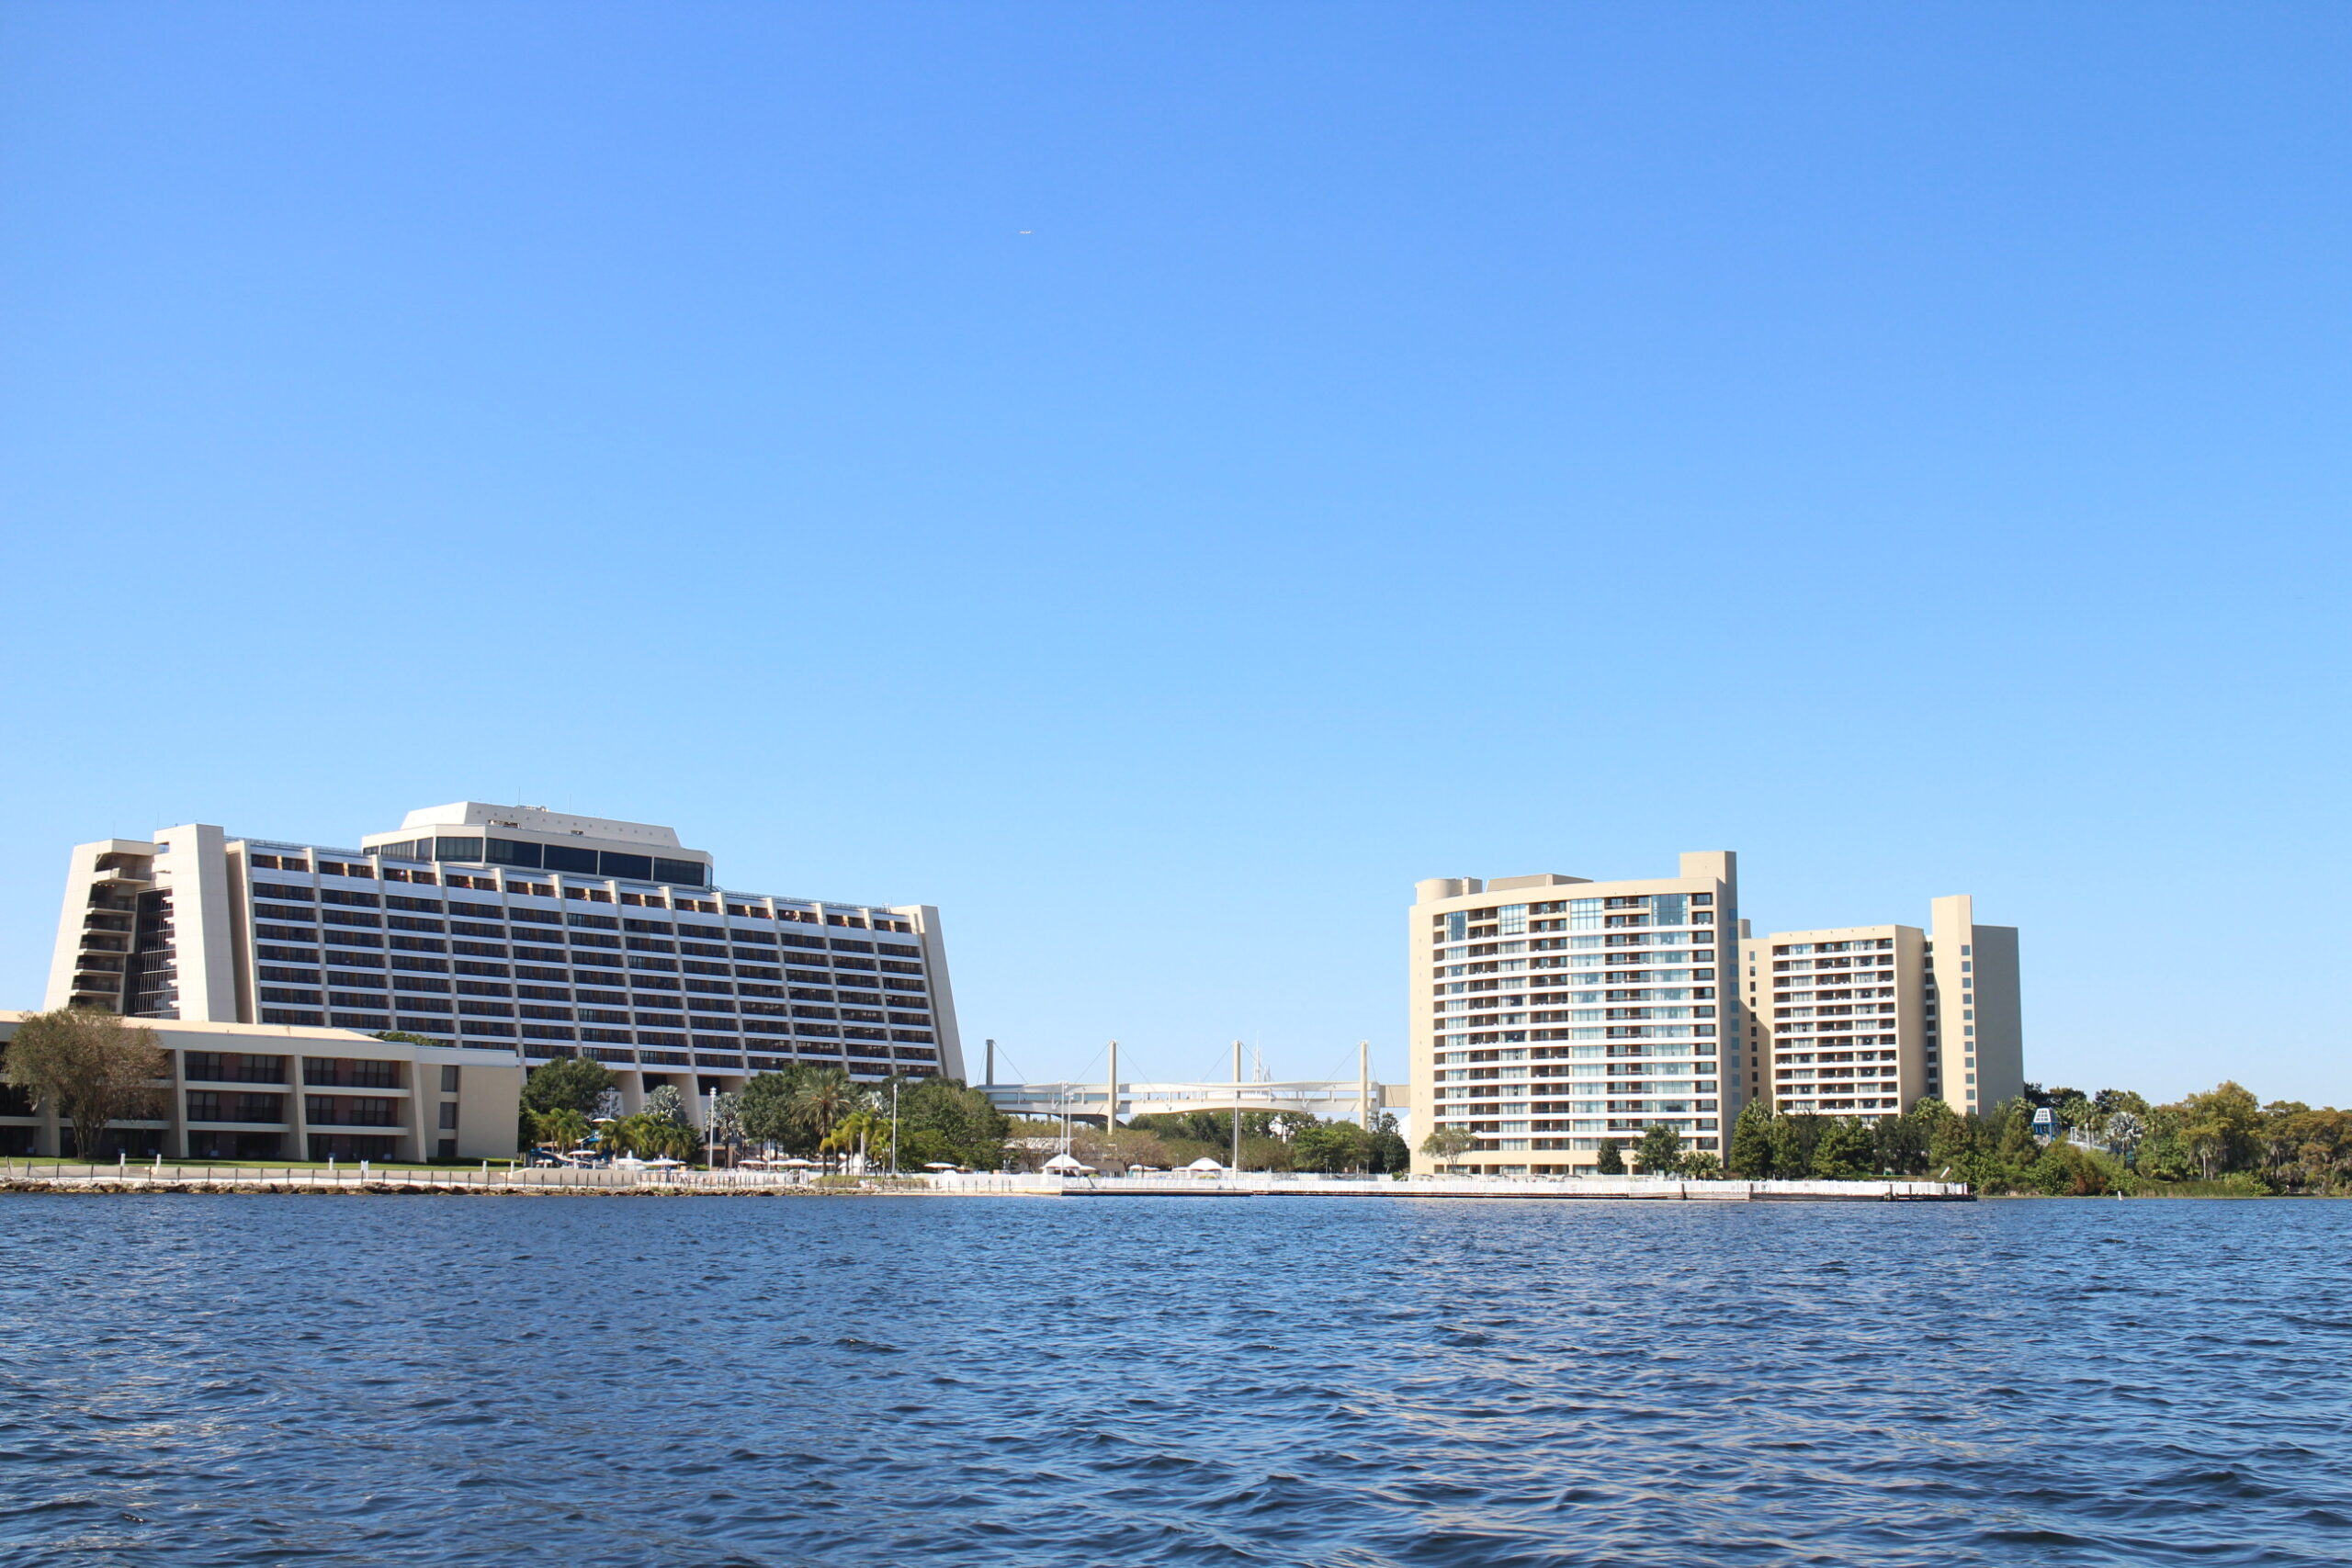 Bay Lake's blue waters with the Contemporary resort on the left and Bay Lake Tower on the right under a blue, cloudless sky How do I sell DVC points?